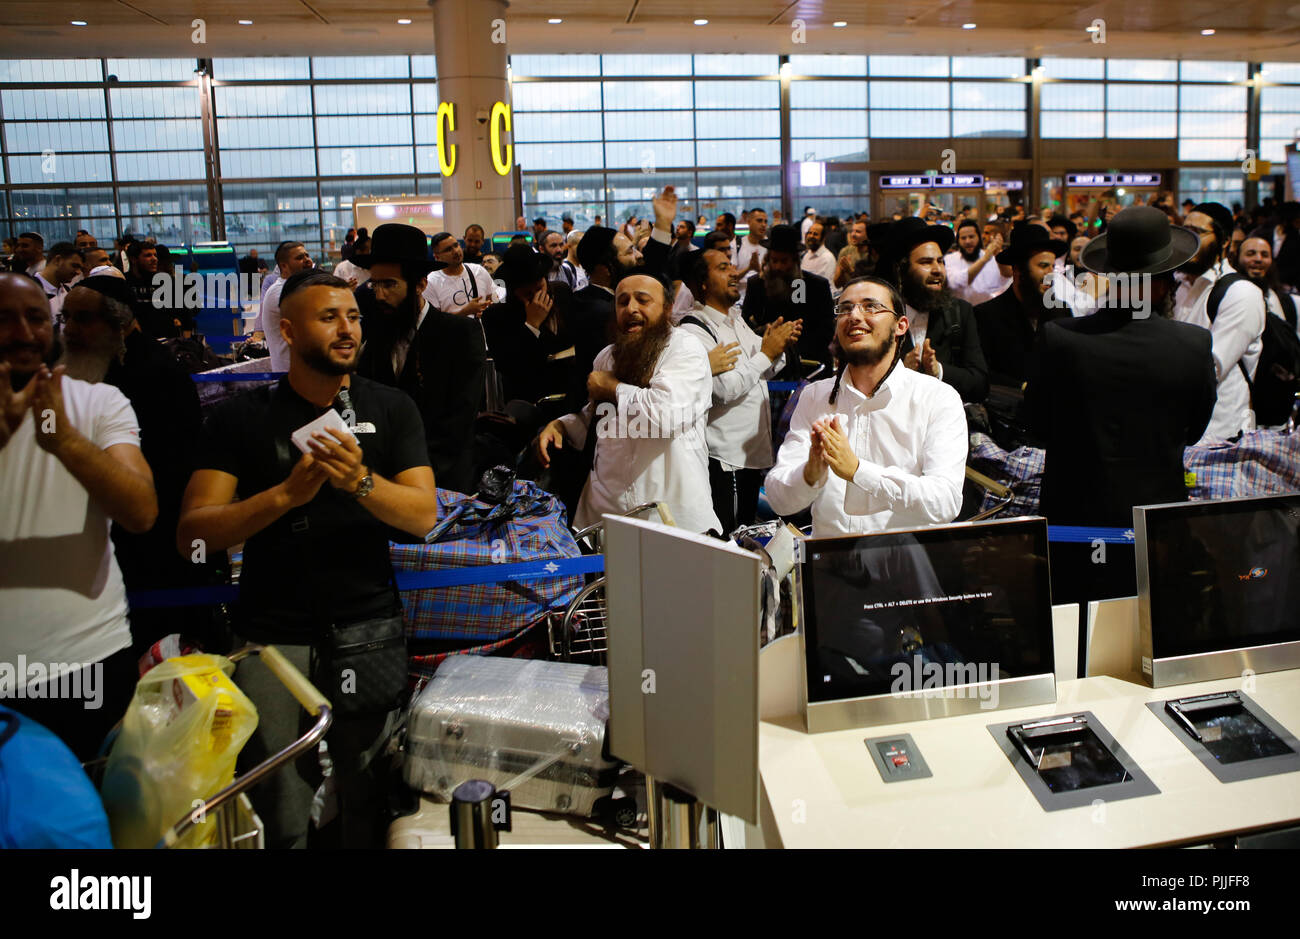 Tel Aviv, Israel. 6th Sep, 2018. Ultra-orthodox Jewish men from Breslov sect dance and sing as they check in to flights headed for Ukrainian city of Uman at Ben-Gurion International Airport near Tel Aviv, Israel, on Sept. 6, 2018. On the Jewish New Year in September, tens of thousands of religious Jews will fly to Uman to pray at the grave of Rabbi Nachman of Breslov, who founded the Hasidic Jewish movement named after him at the end of the 18th century. Credit: Gil Cohen Magen/Xinhua/Alamy Live News Stock Photo